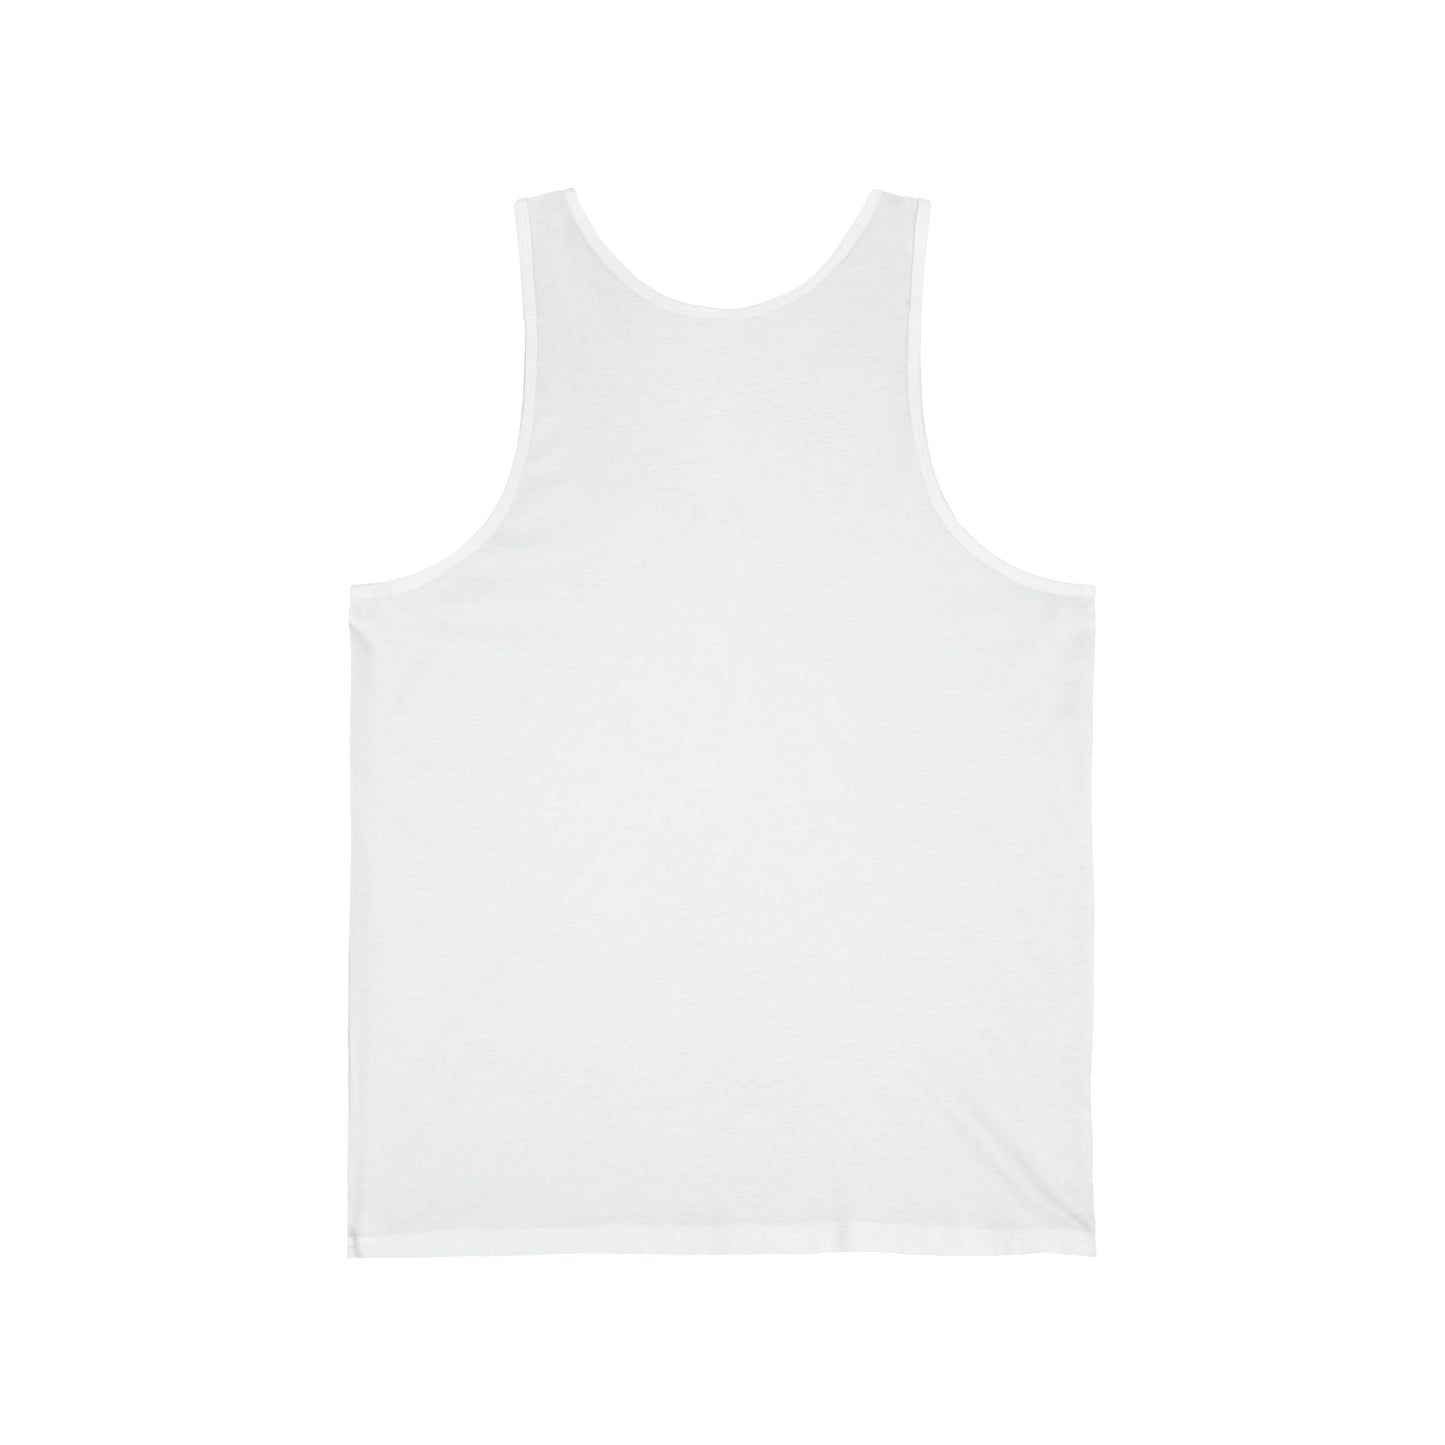 TOPOCK TRY THAT Unisex Jersey Tank